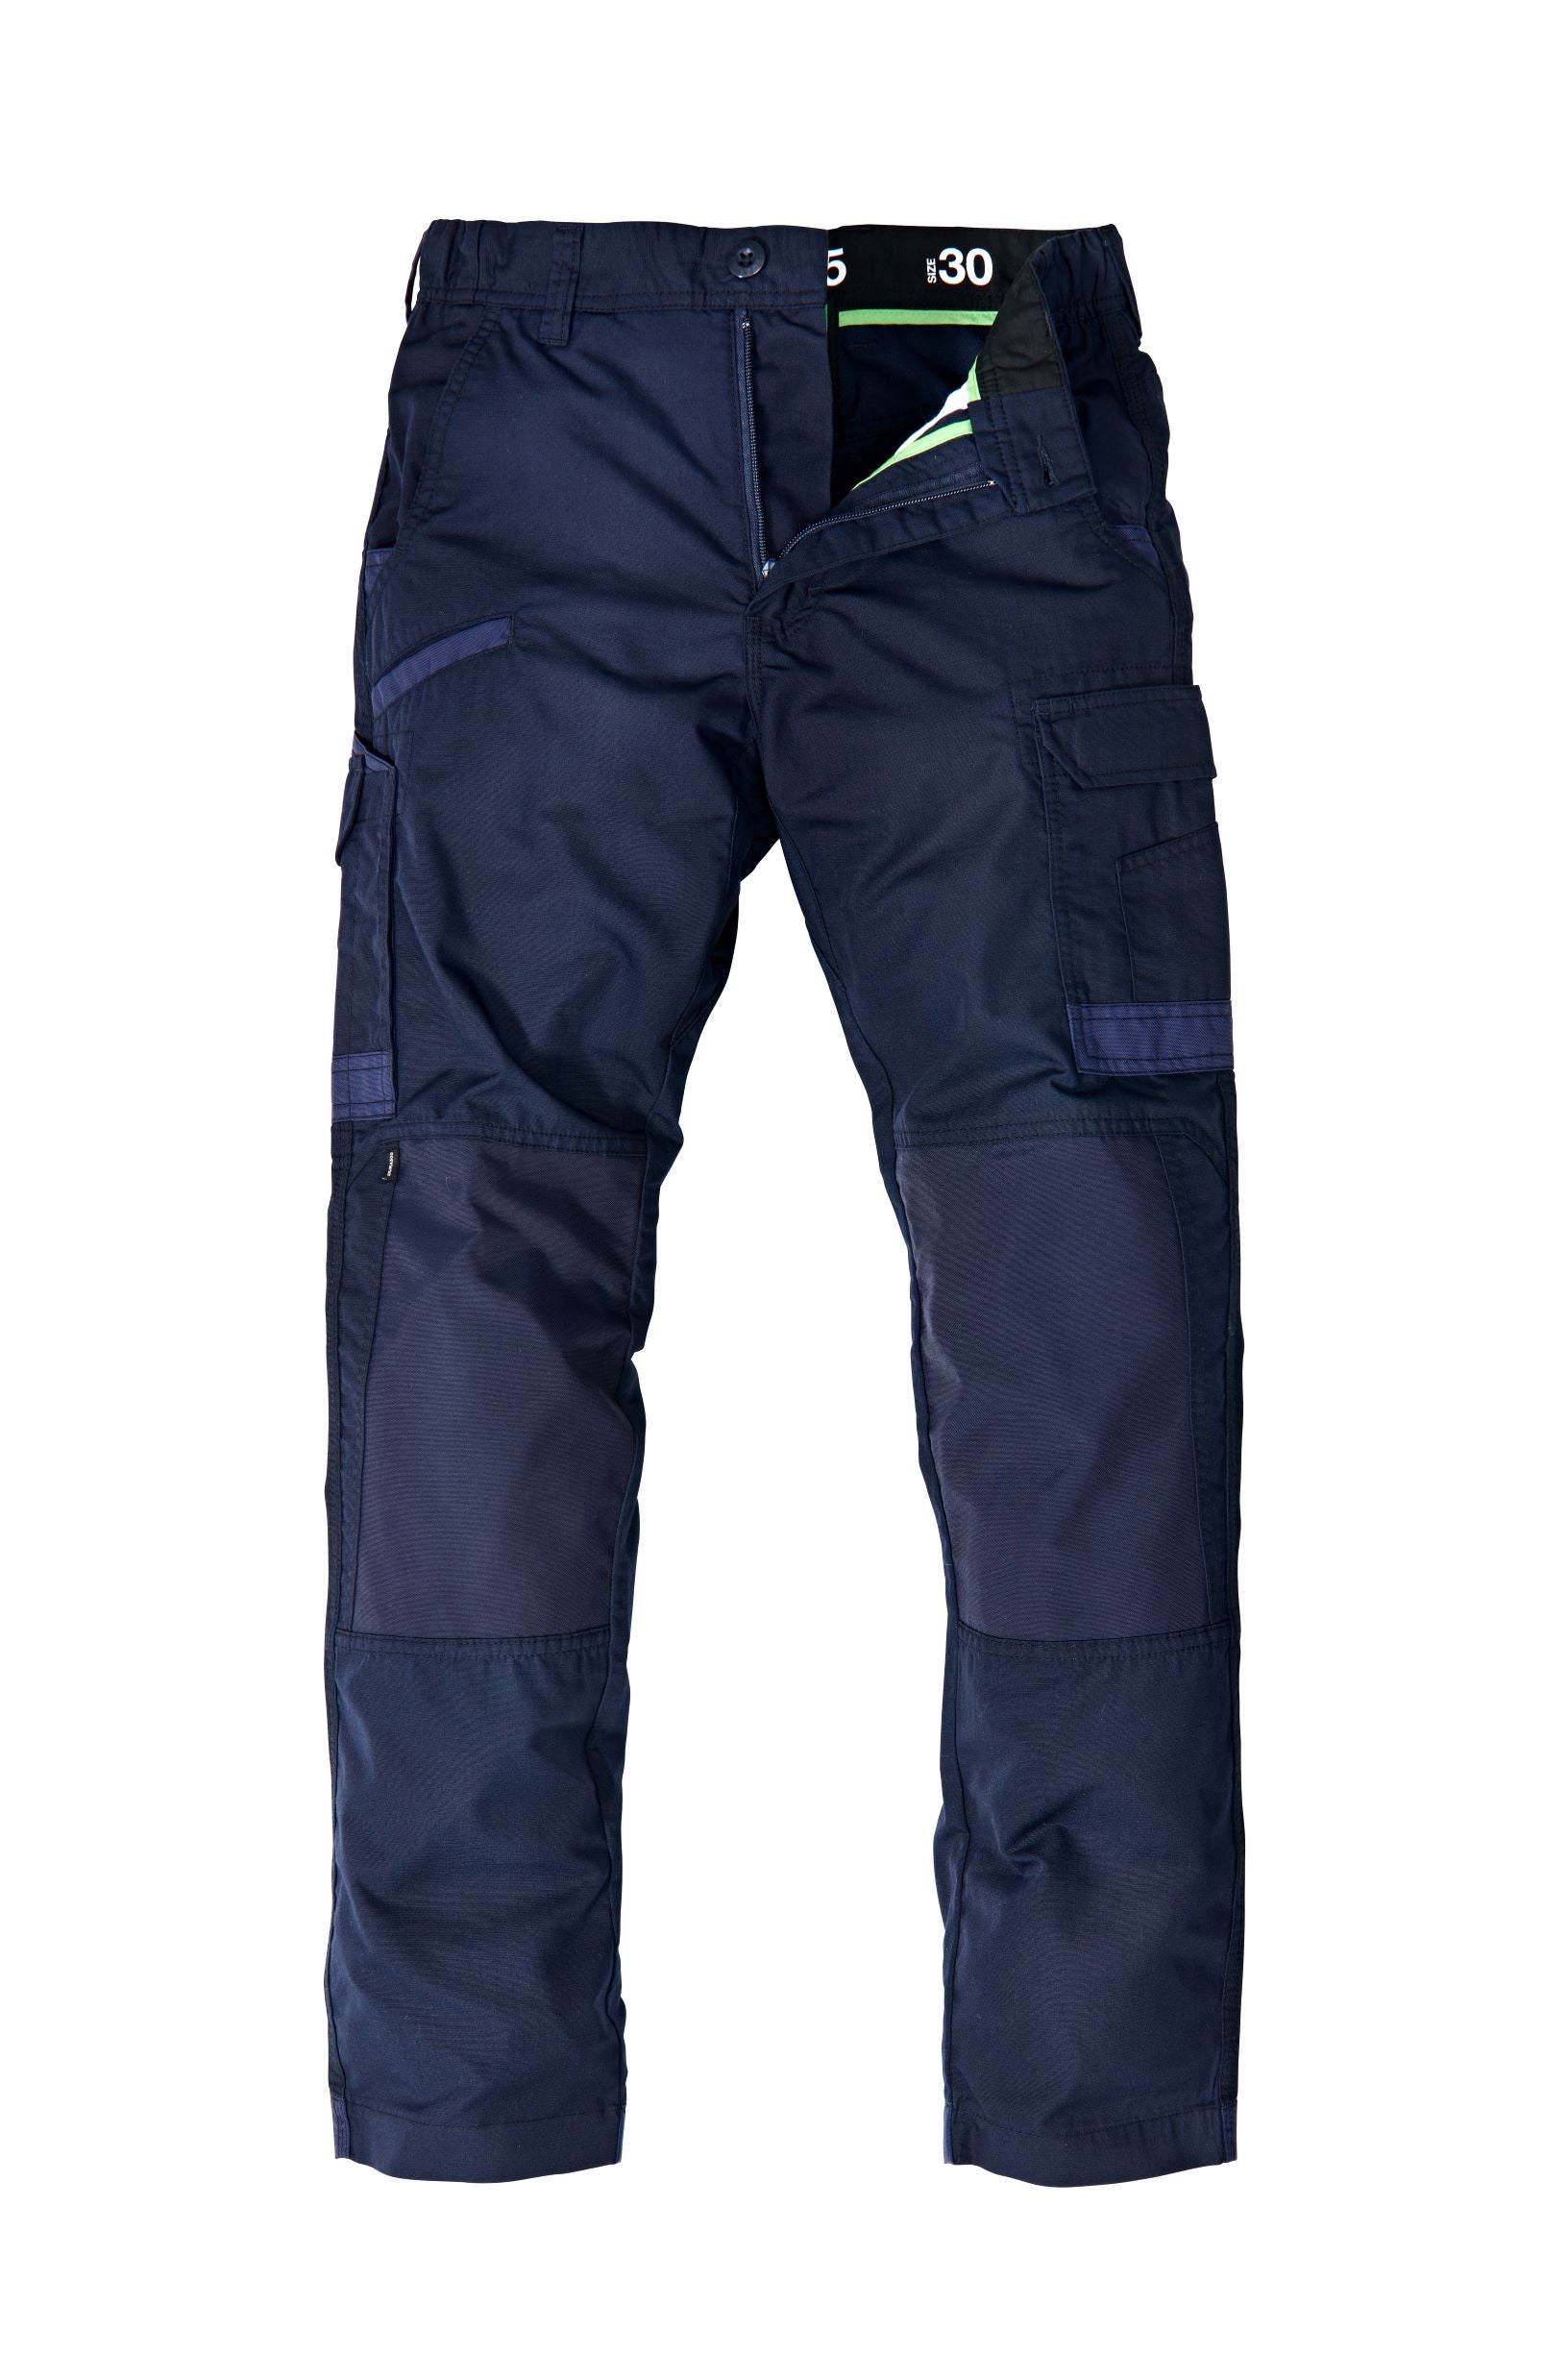 FXD - WP5 - Lightweight Stretch Pants